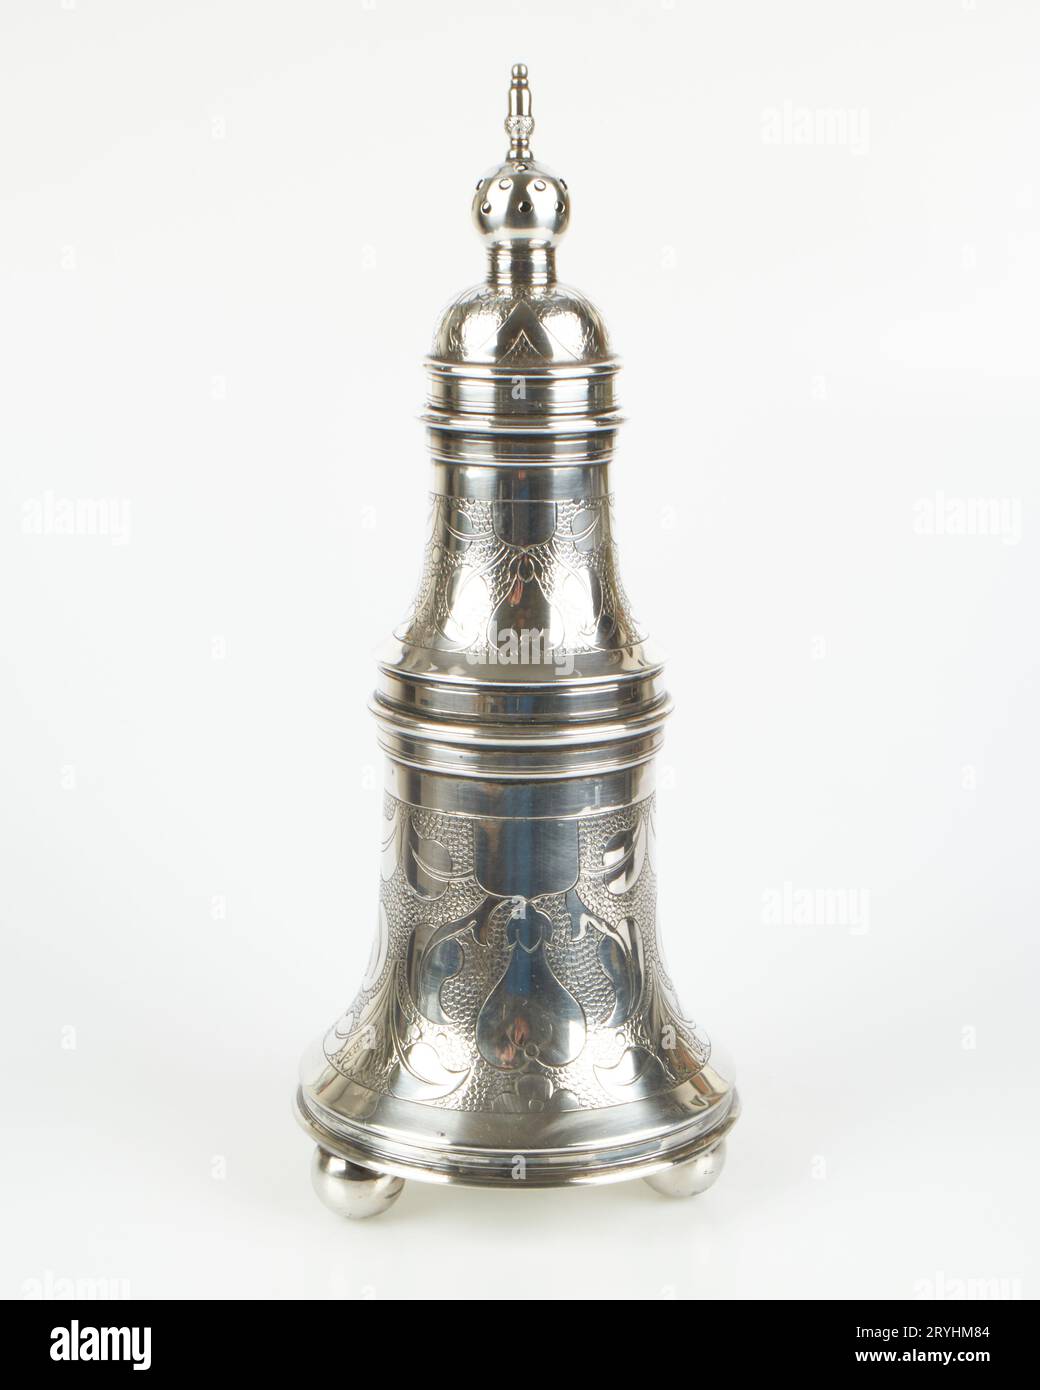 Large antique 1890-1910 Arts and Crafts silver plated muffineer sugar shaker Stock Photo